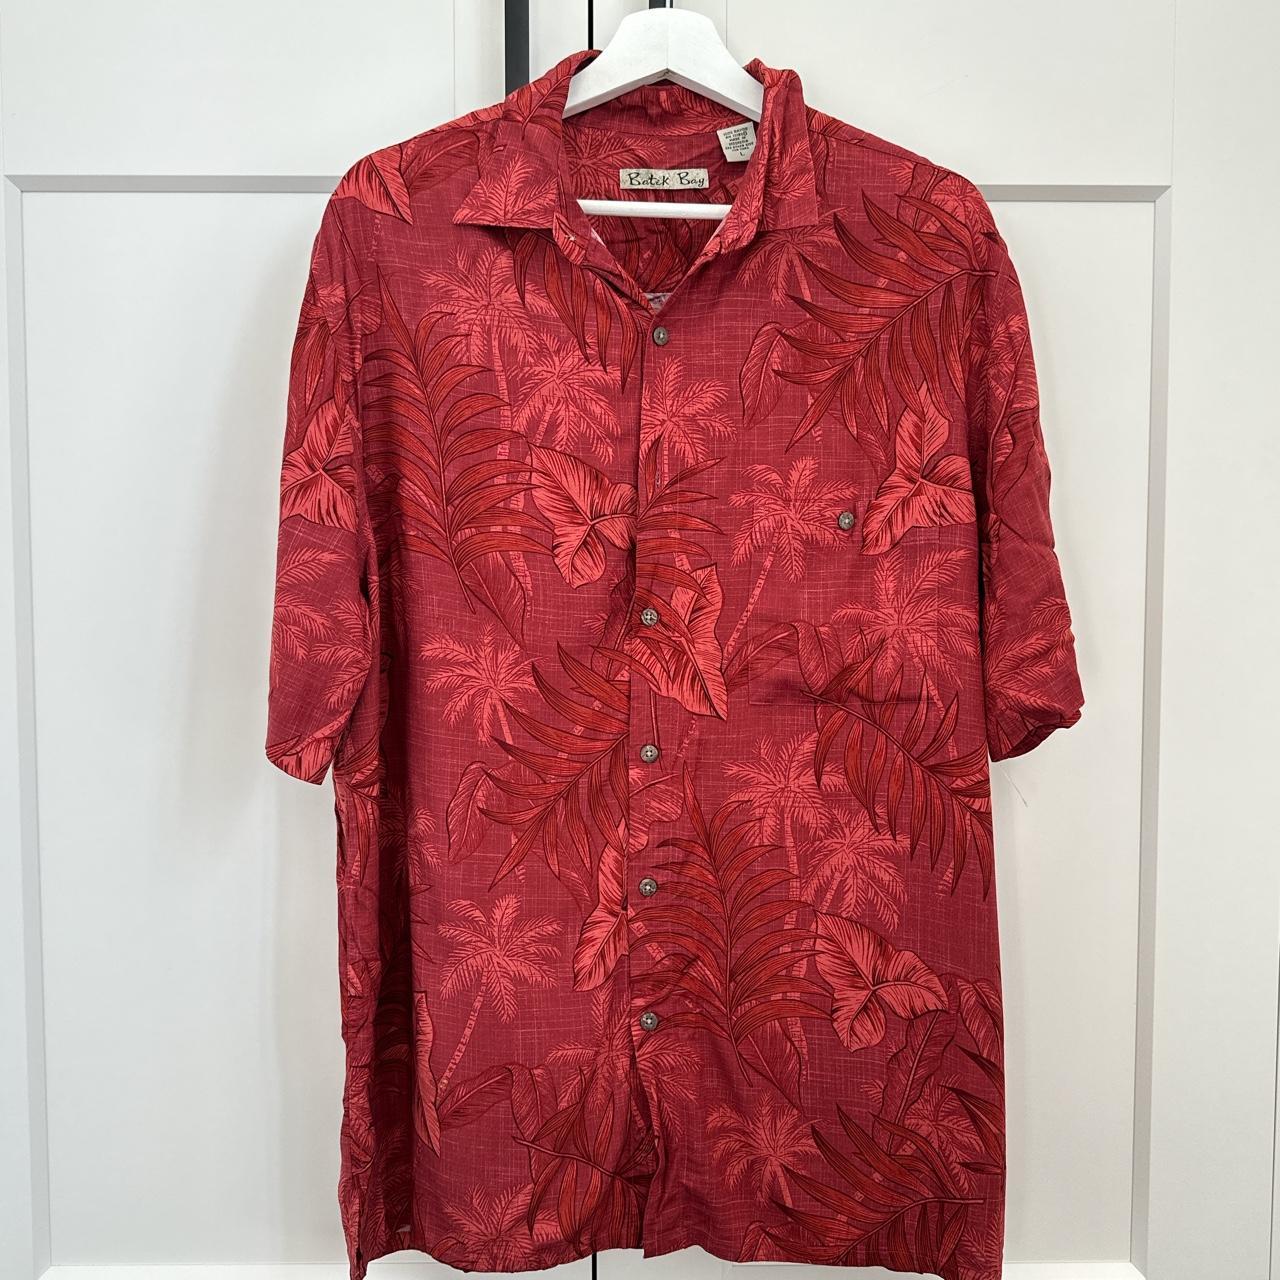 Vintage Hawaiian button up Shirt This funky vintage... - Depop